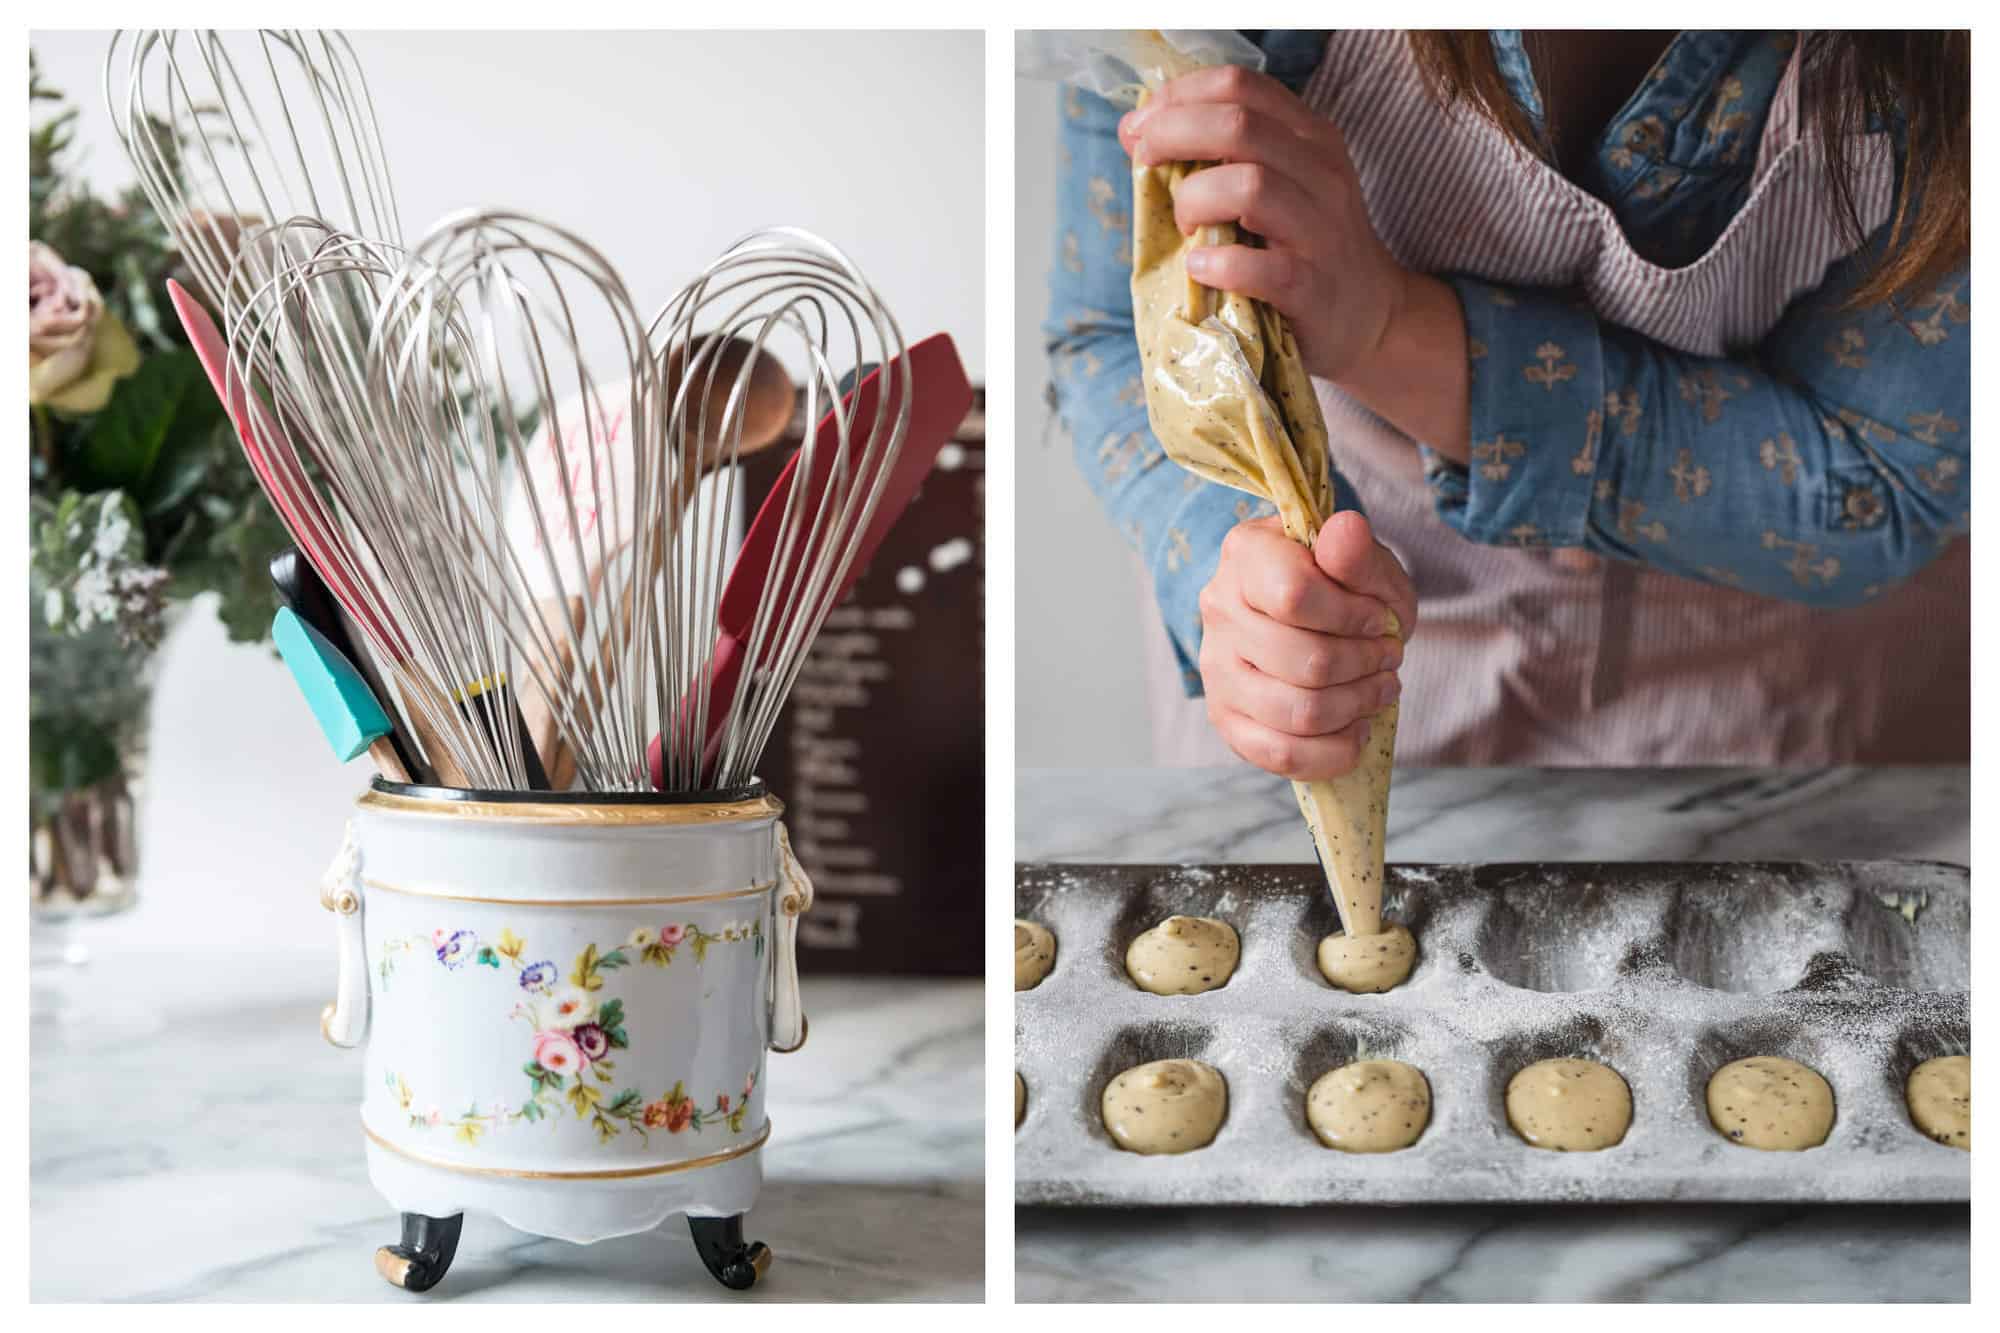 left: a vase with an assortment of cooking utensils including wooden spatula and a whisk. Right: Chef Molly Wilkinson piping batter into silicon baking tray